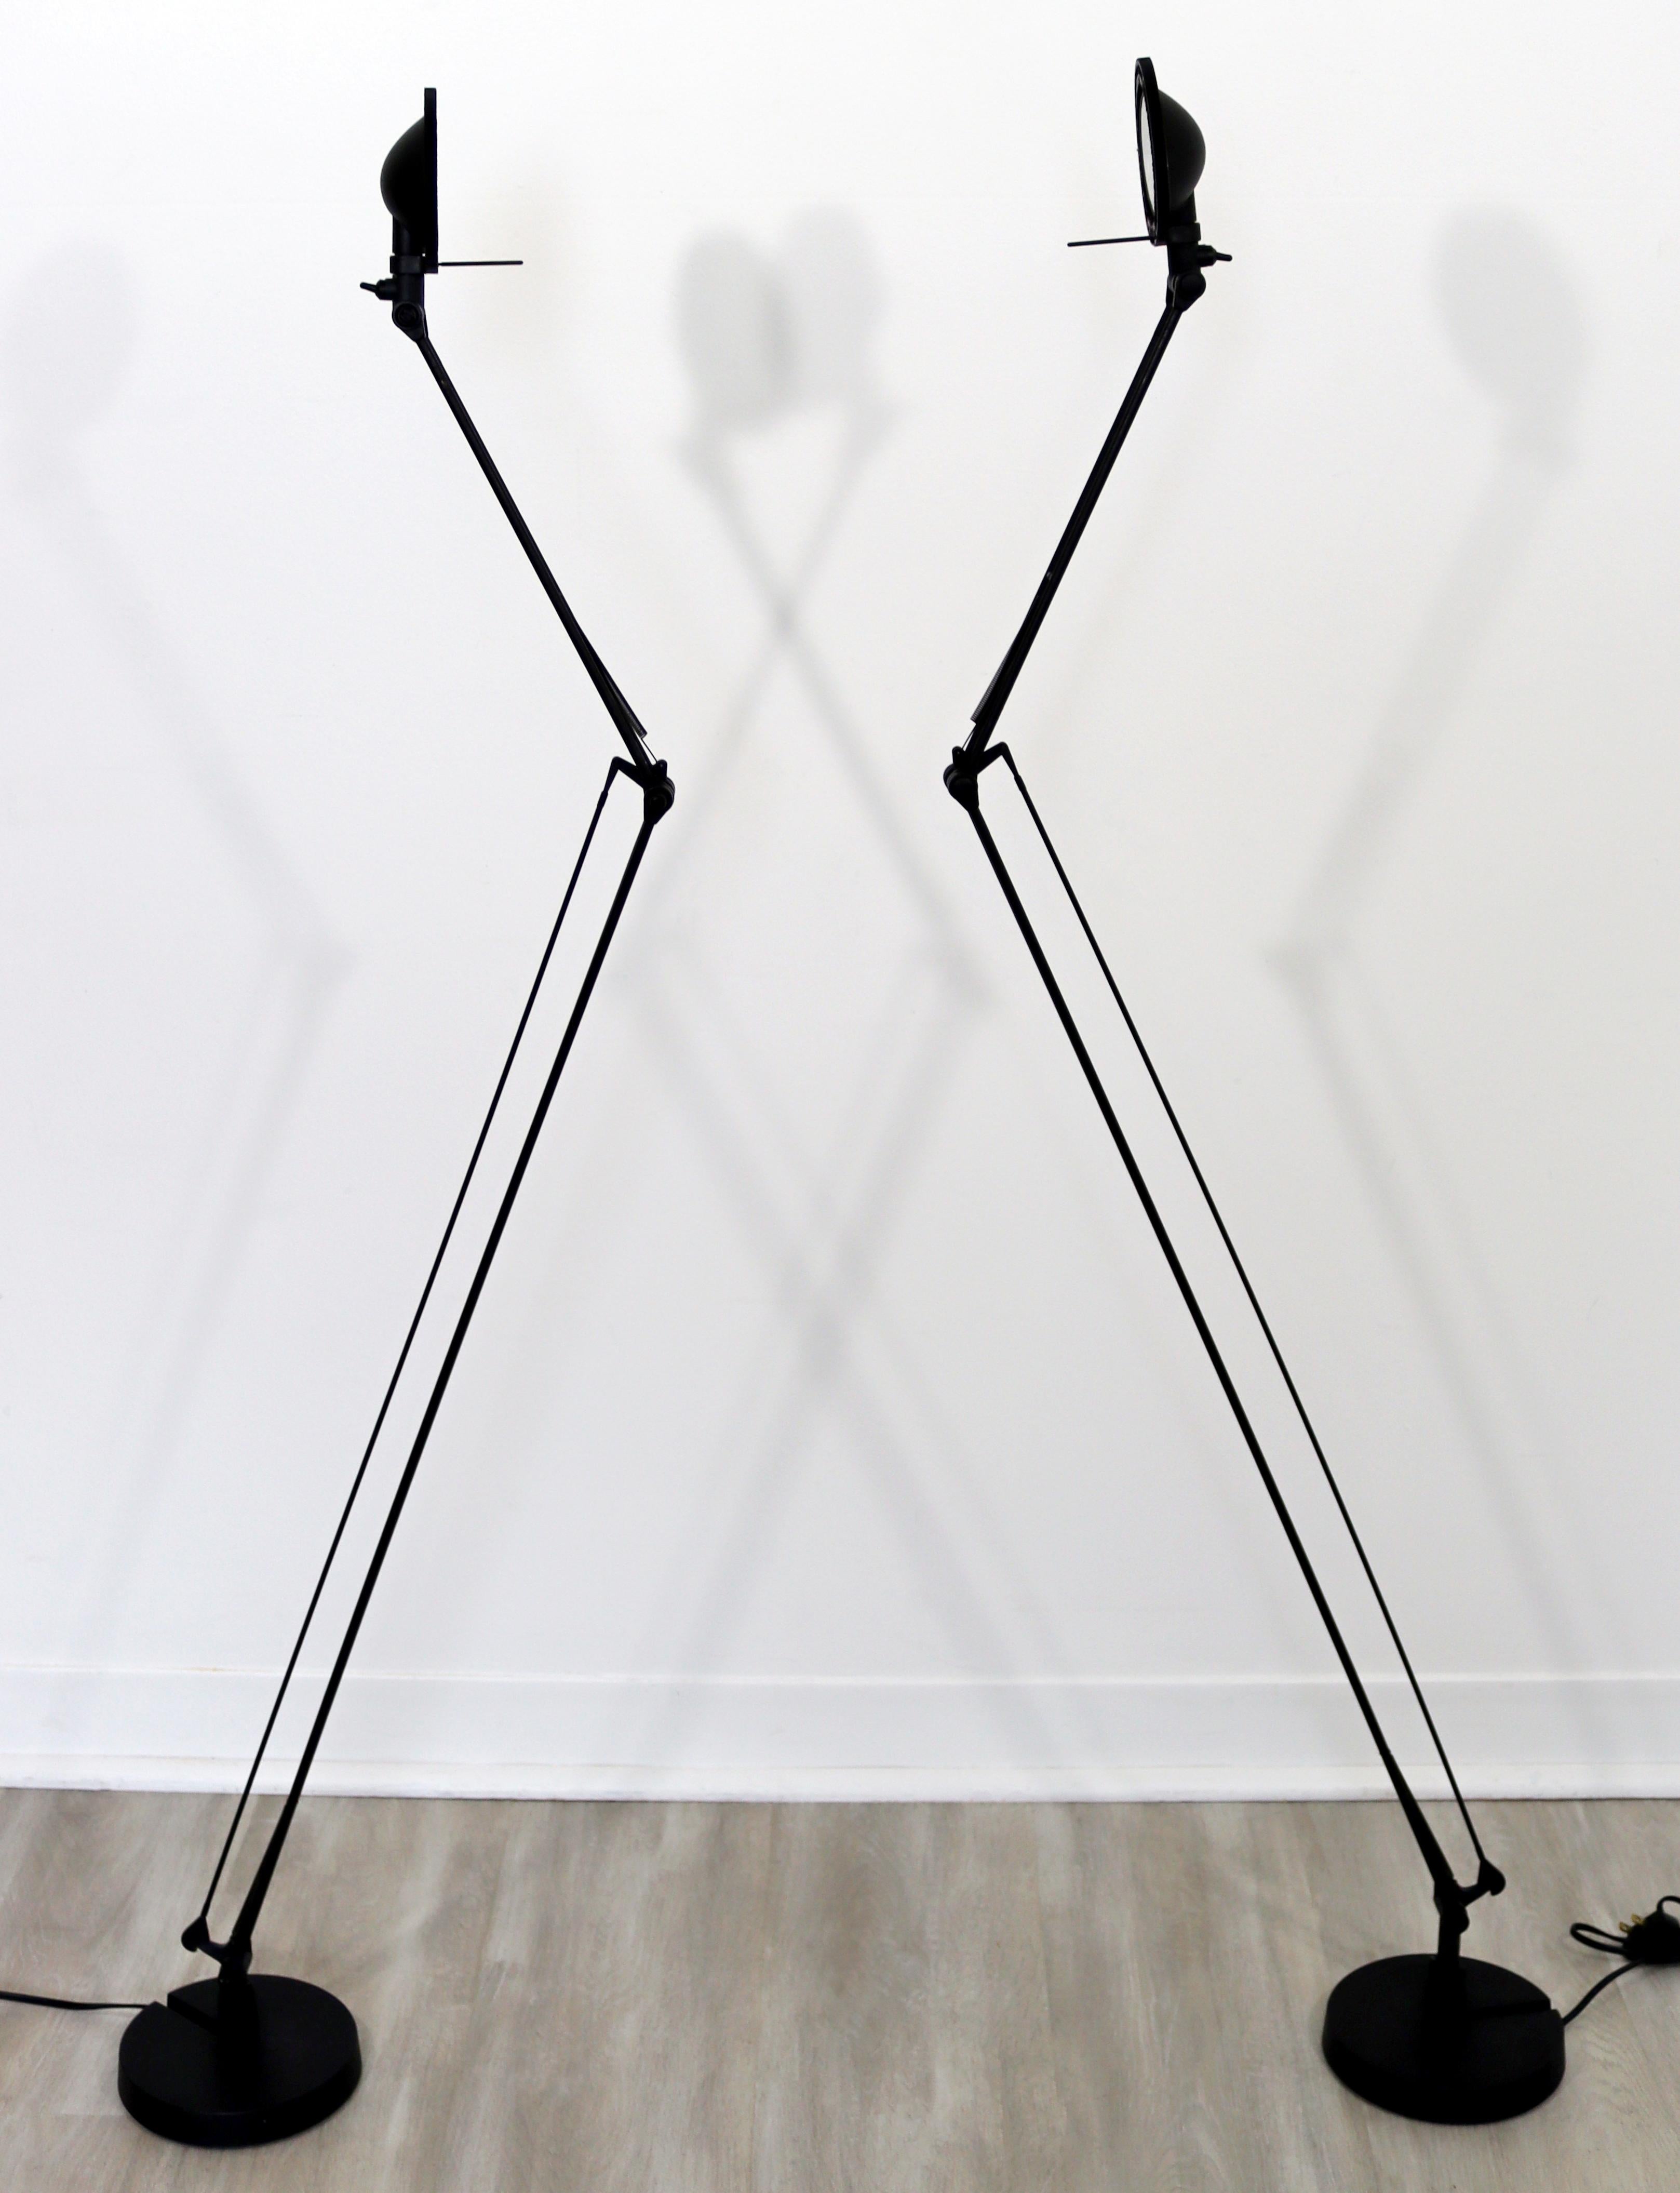 For your consideration is an outstanding pair of adjustable, architectural, metal task lamps, designed by Paolo Rizzatto and Alberto Meda, made in Italy, circa the 1980s. The base is 6